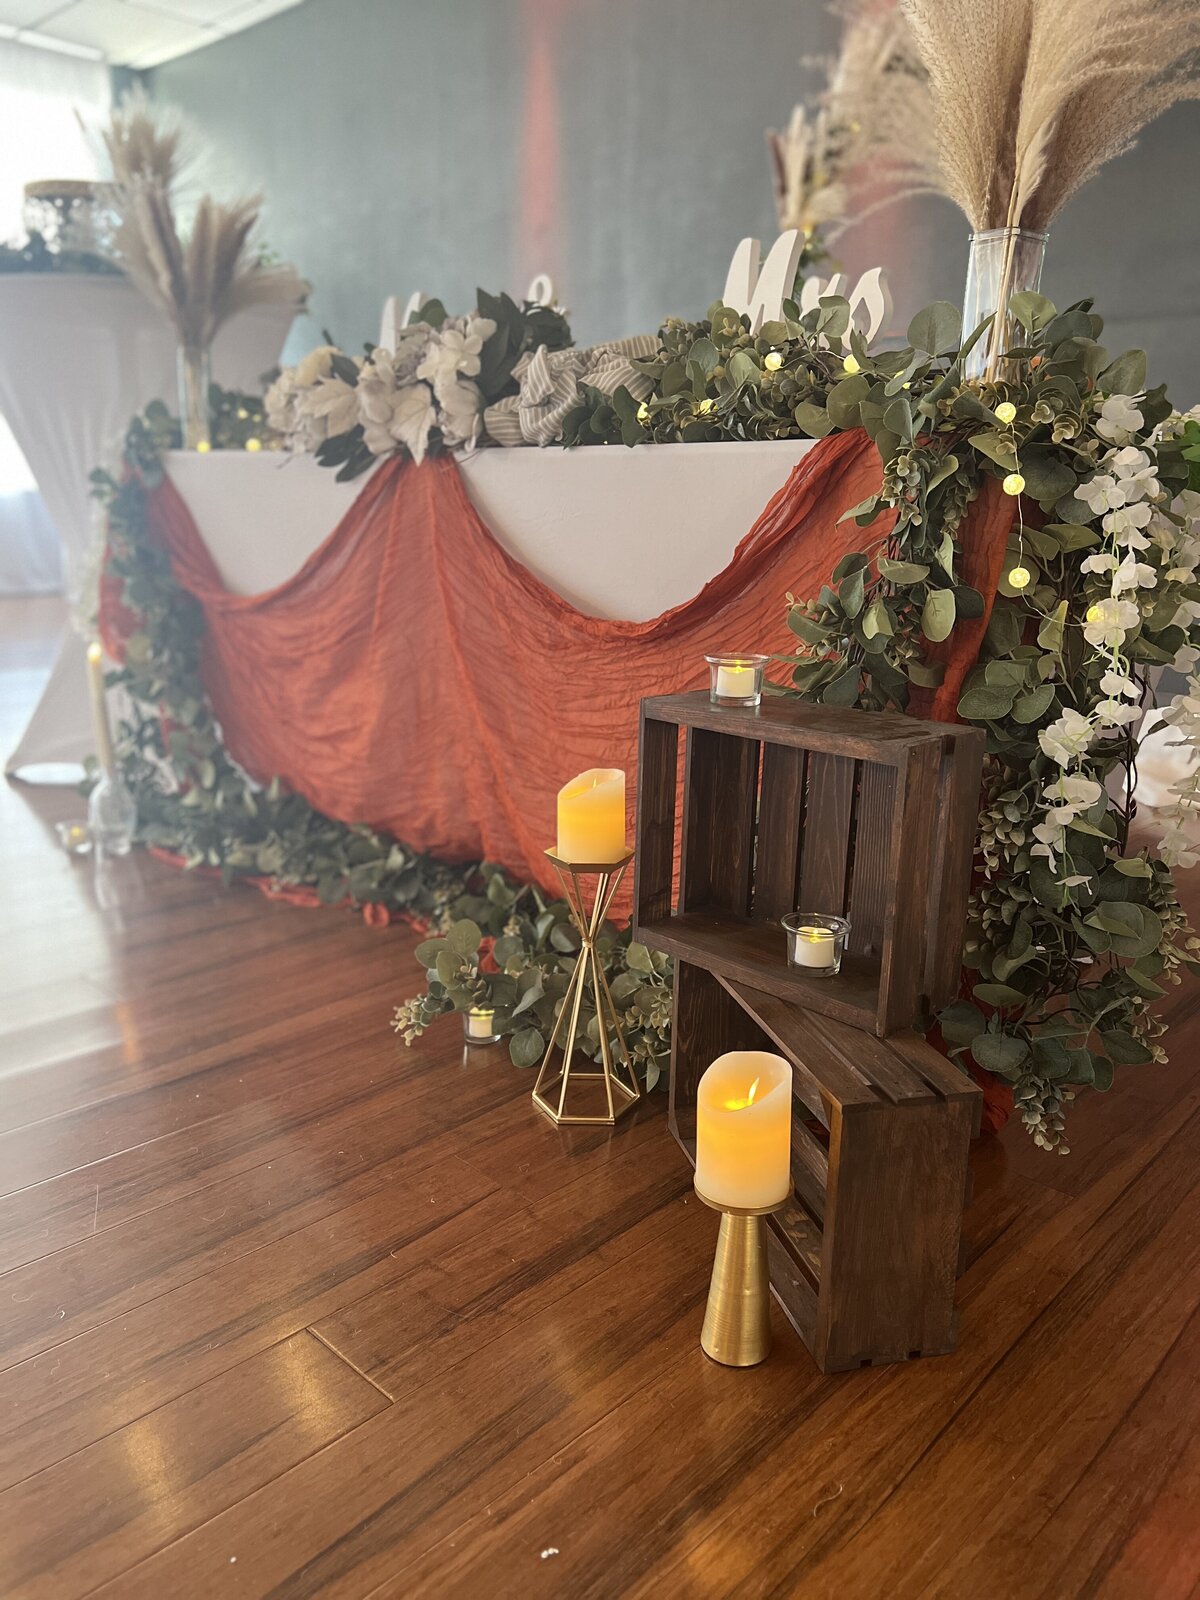 Wedding reception sweetheart table adorned in our natural boho design, part of our affordable decor packages - Customizable colors, boho centerpieces, and LED candles create a romantic ambiance